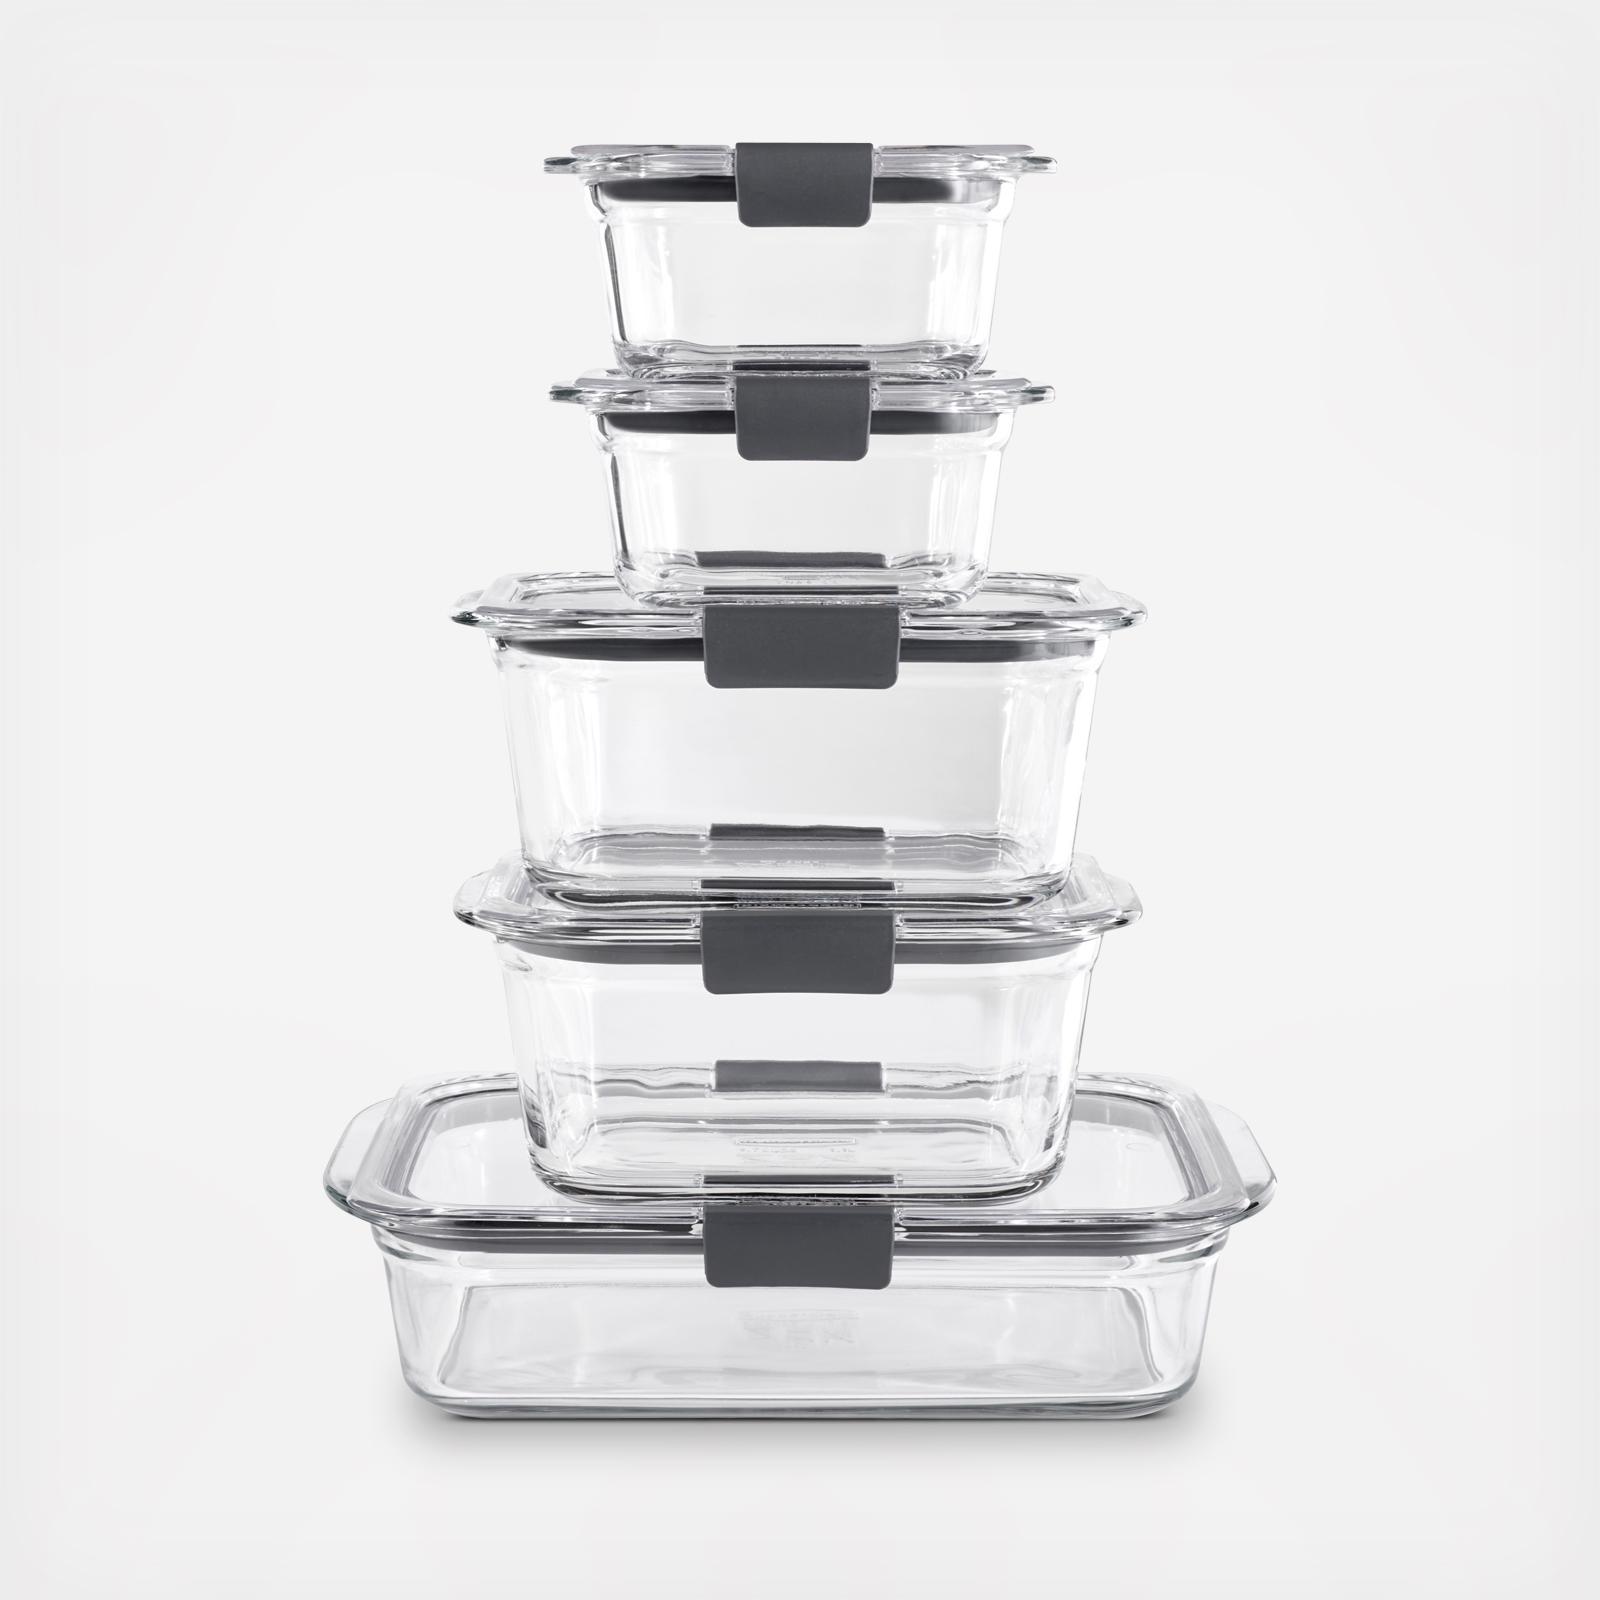 Rubbermaid Brilliance BPA Free Food Storage Containers with Lids, Airtight,  for Kitchen and Pantry Organization, New Set of 10 w/ Scoops